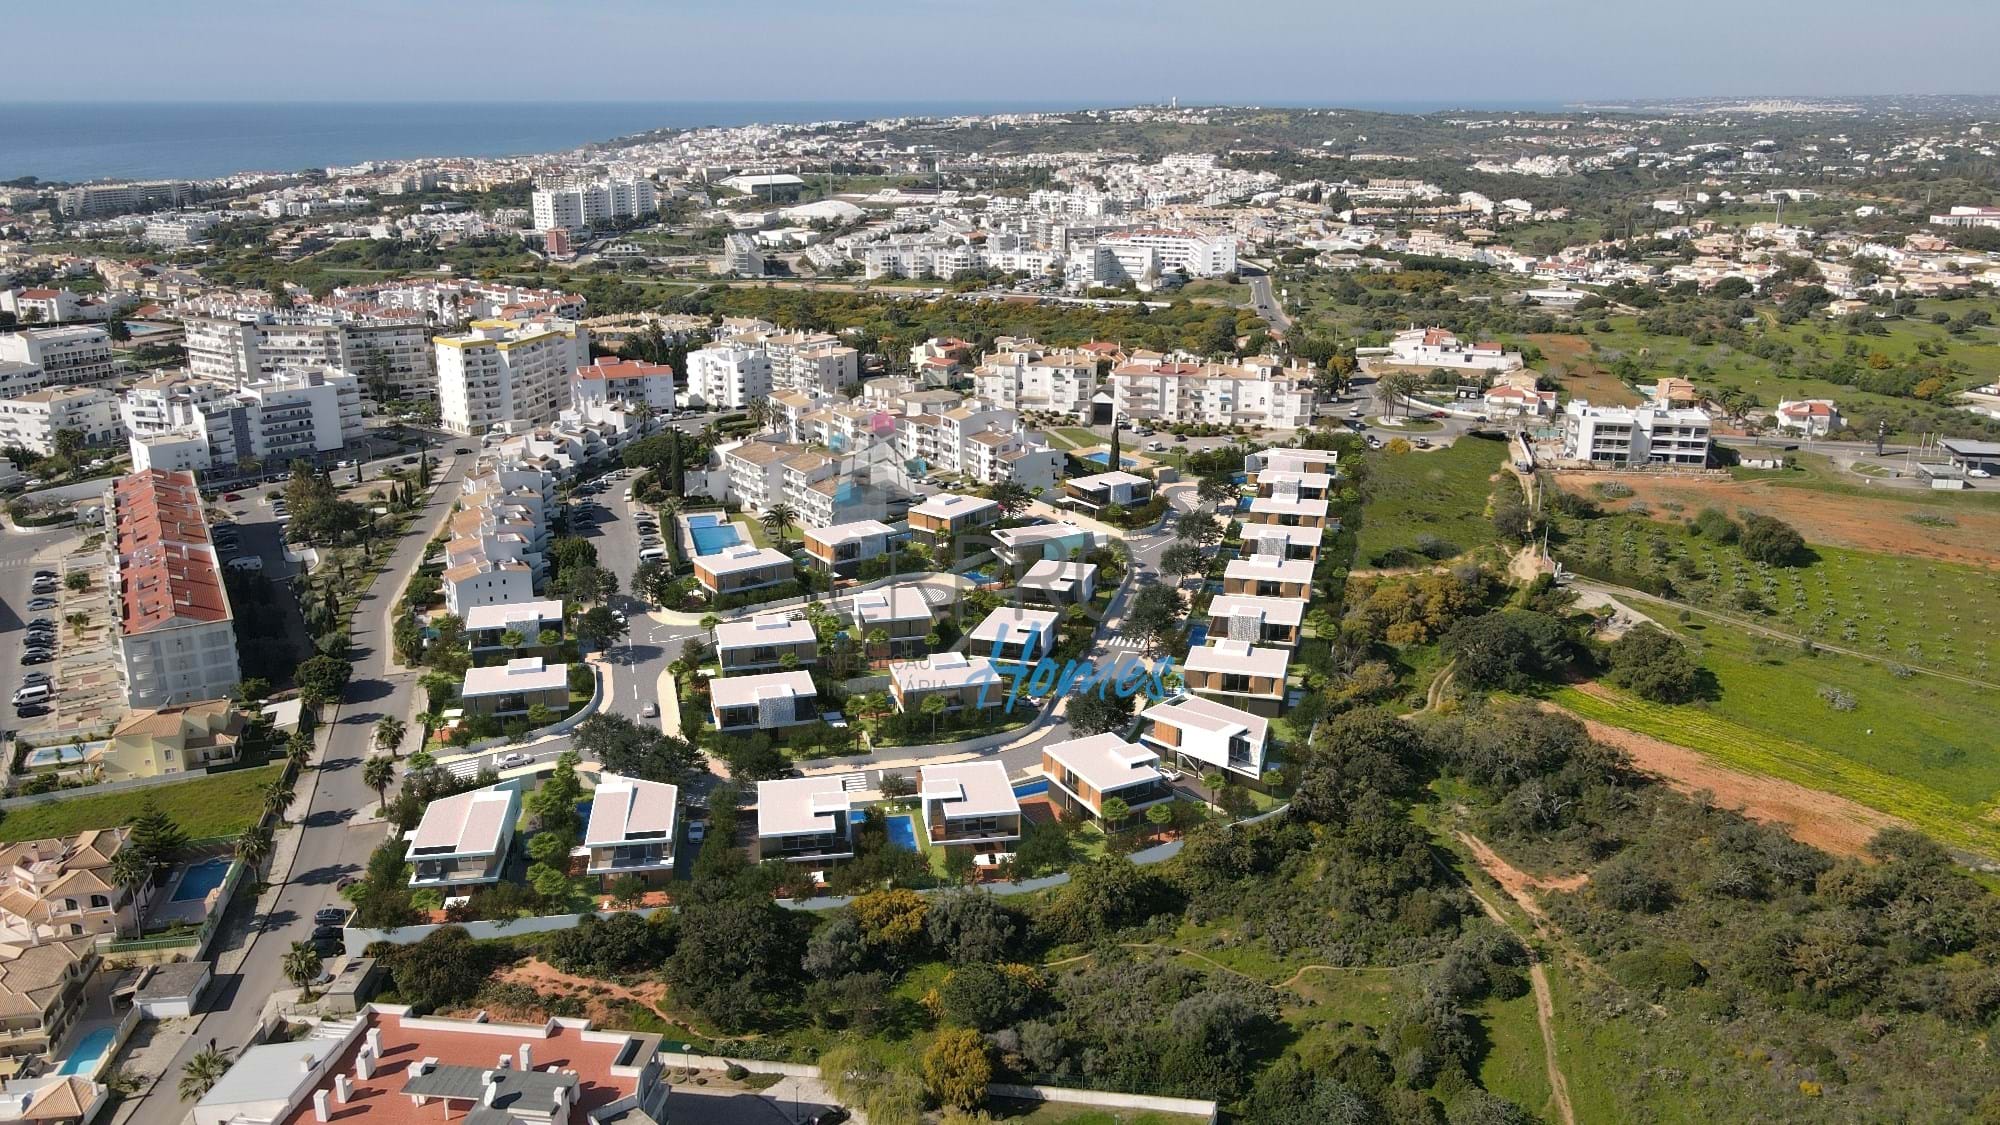 For sale, plots of land for construction in a new allotment in the city centre of Albufeira. 